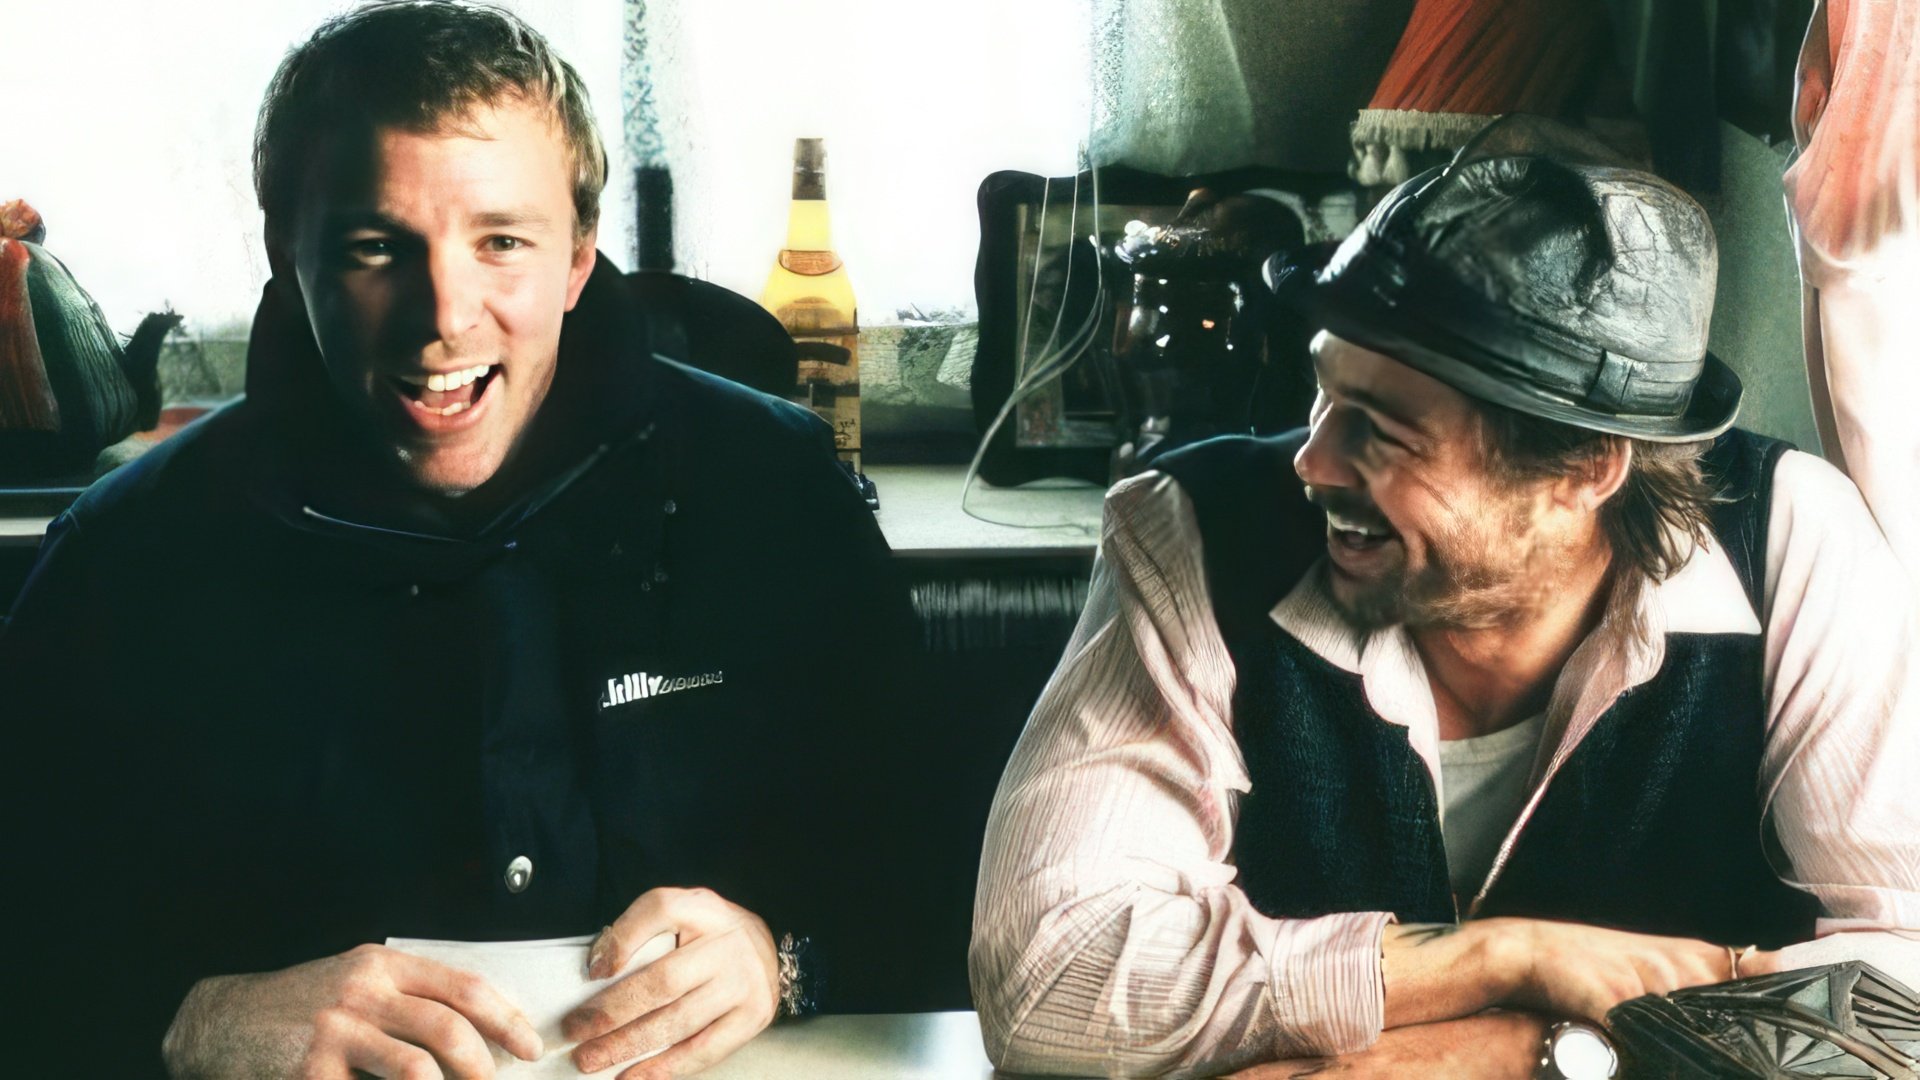 Young Guy Ritchie and Brad Pitt on the set of the Snatch